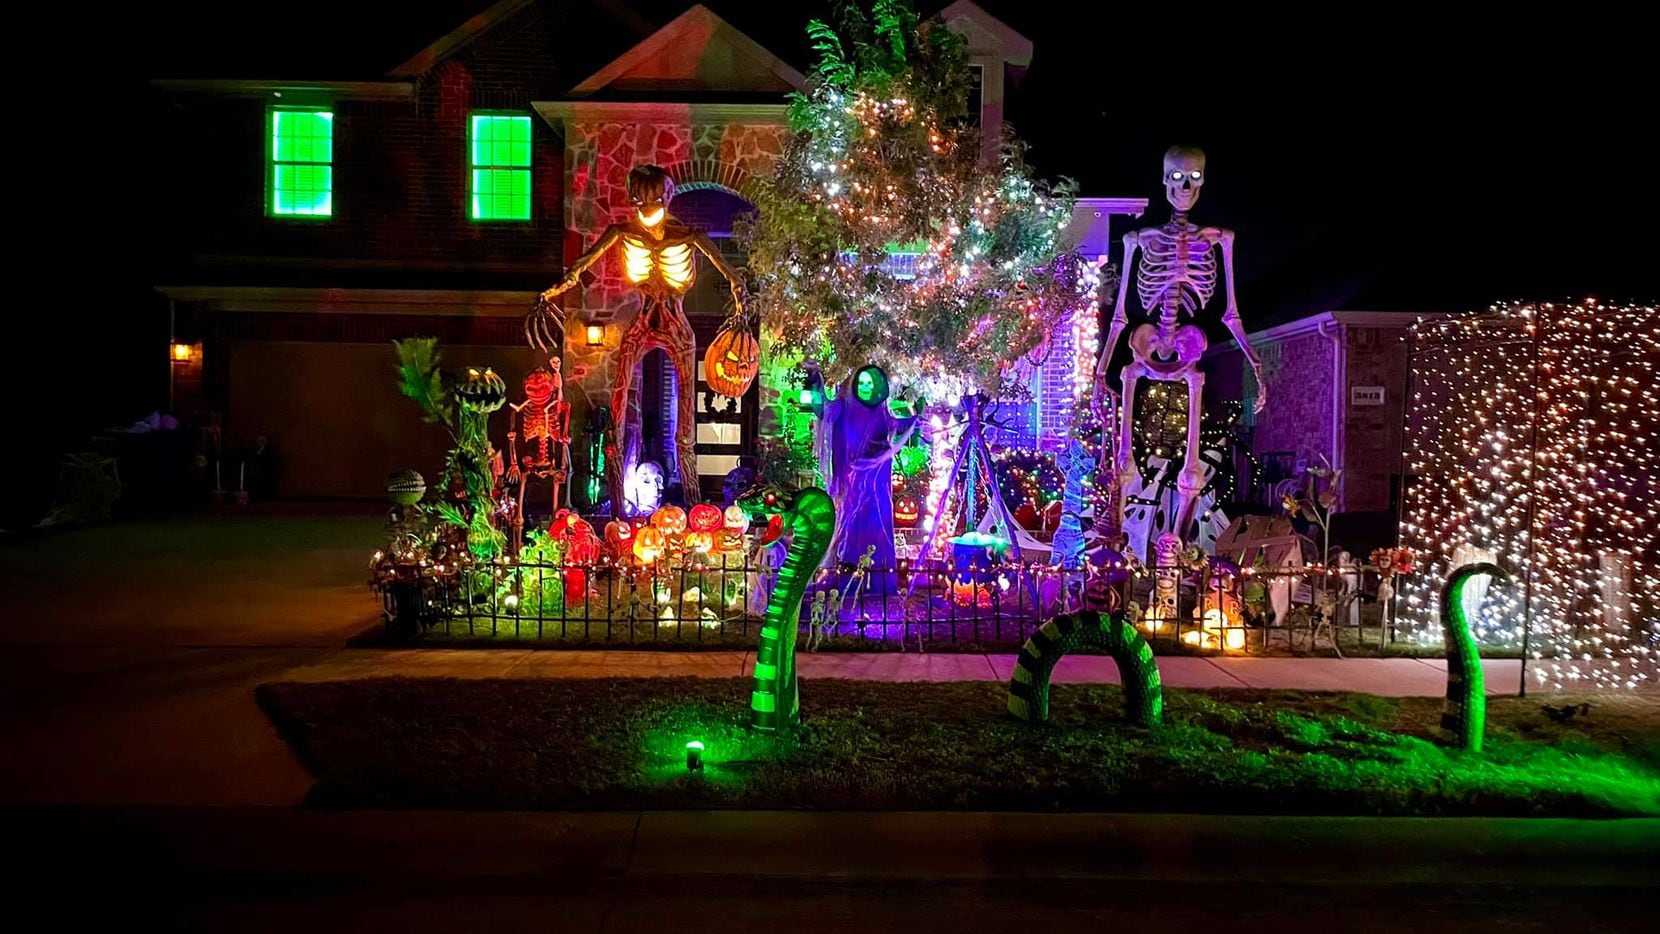 The Burkman Holiday Home is located at 3809 Hazelhurst Dr. in Frisco. Last year's...